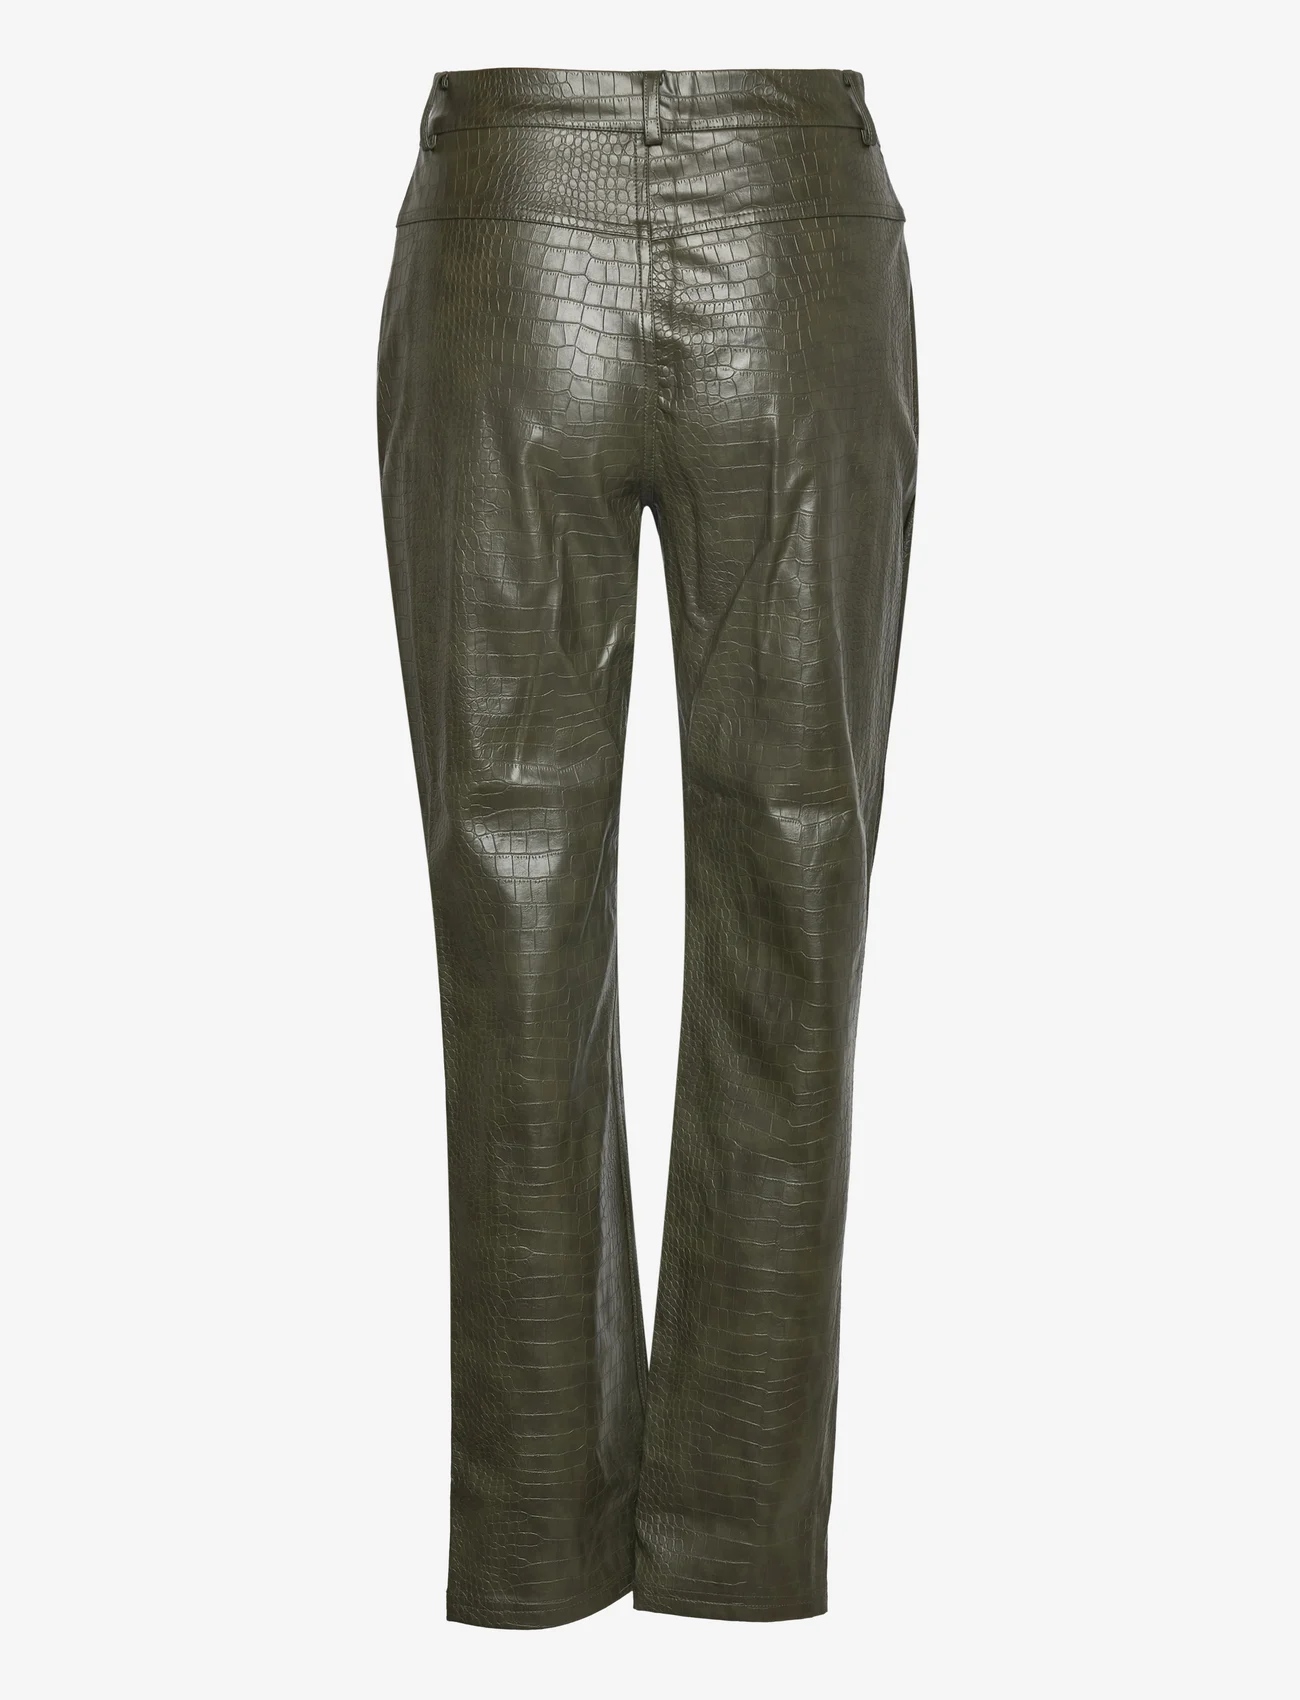 Hosbjerg - Haze Croc Pants - party wear at outlet prices - army - 1